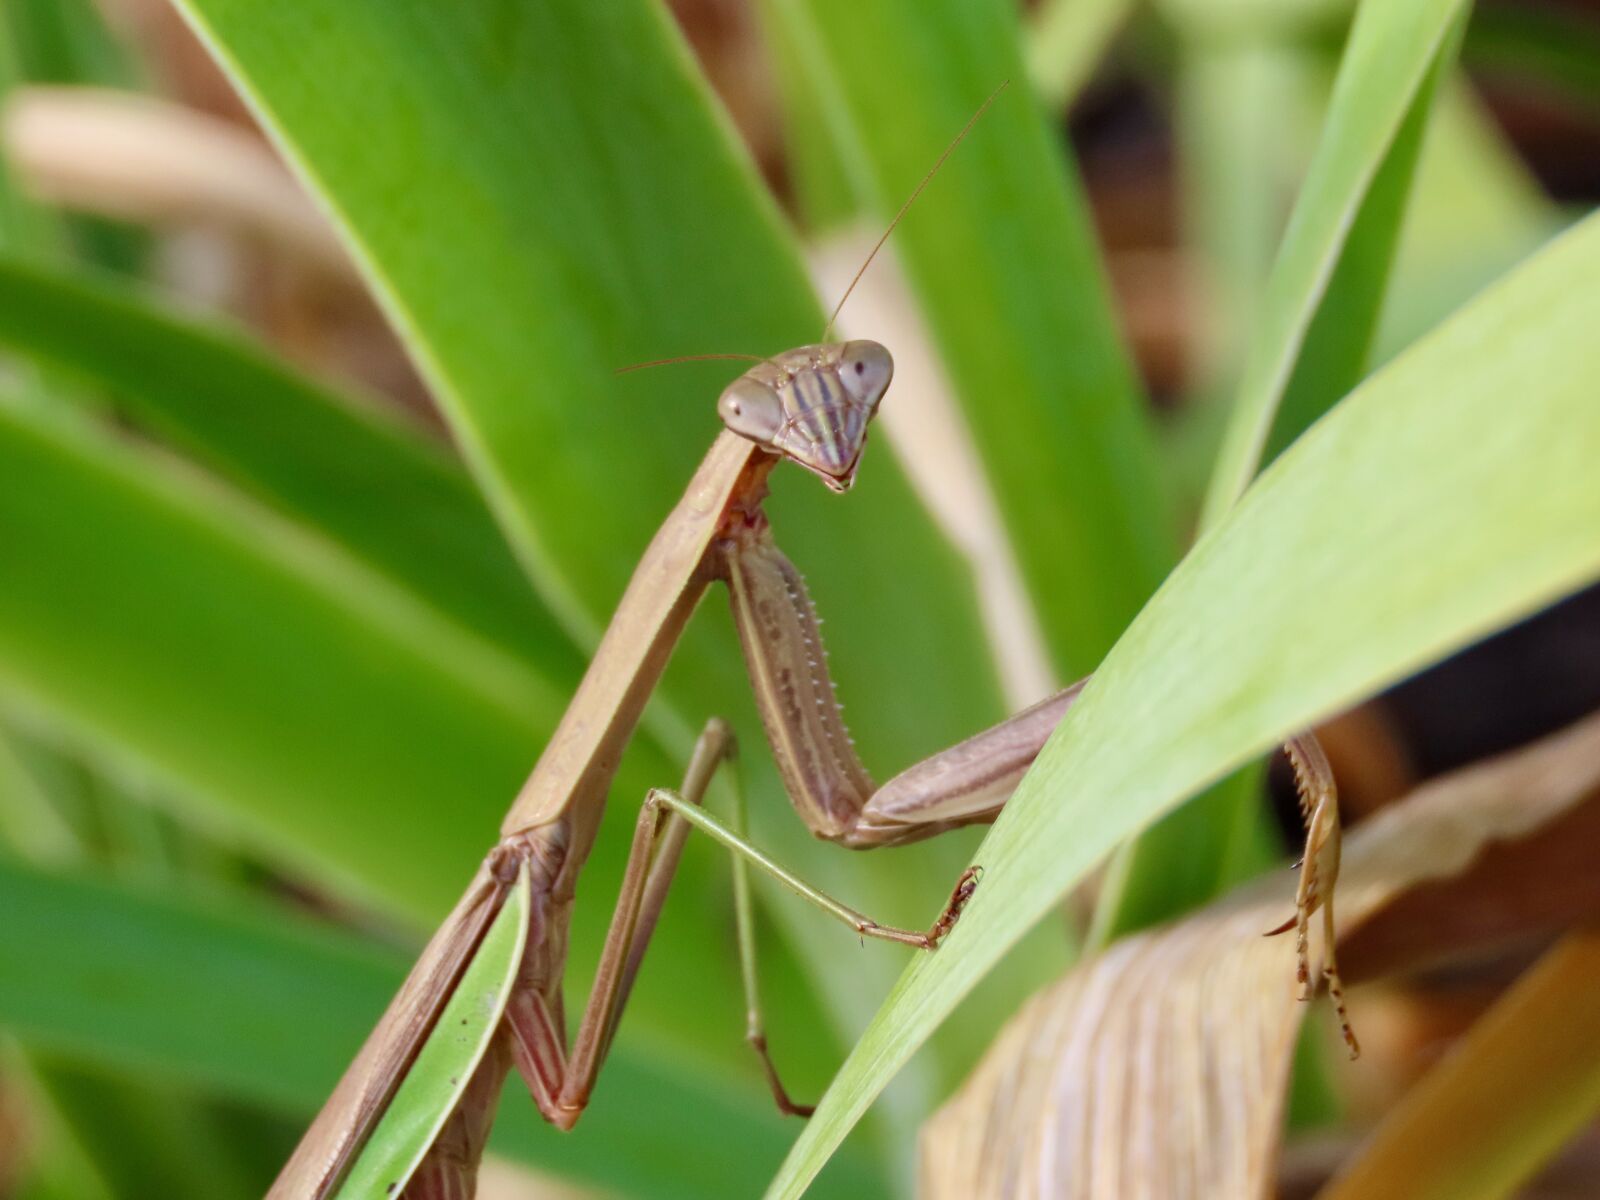 Canon PowerShot SX70 HS sample photo. Insect, mantis, nature photography